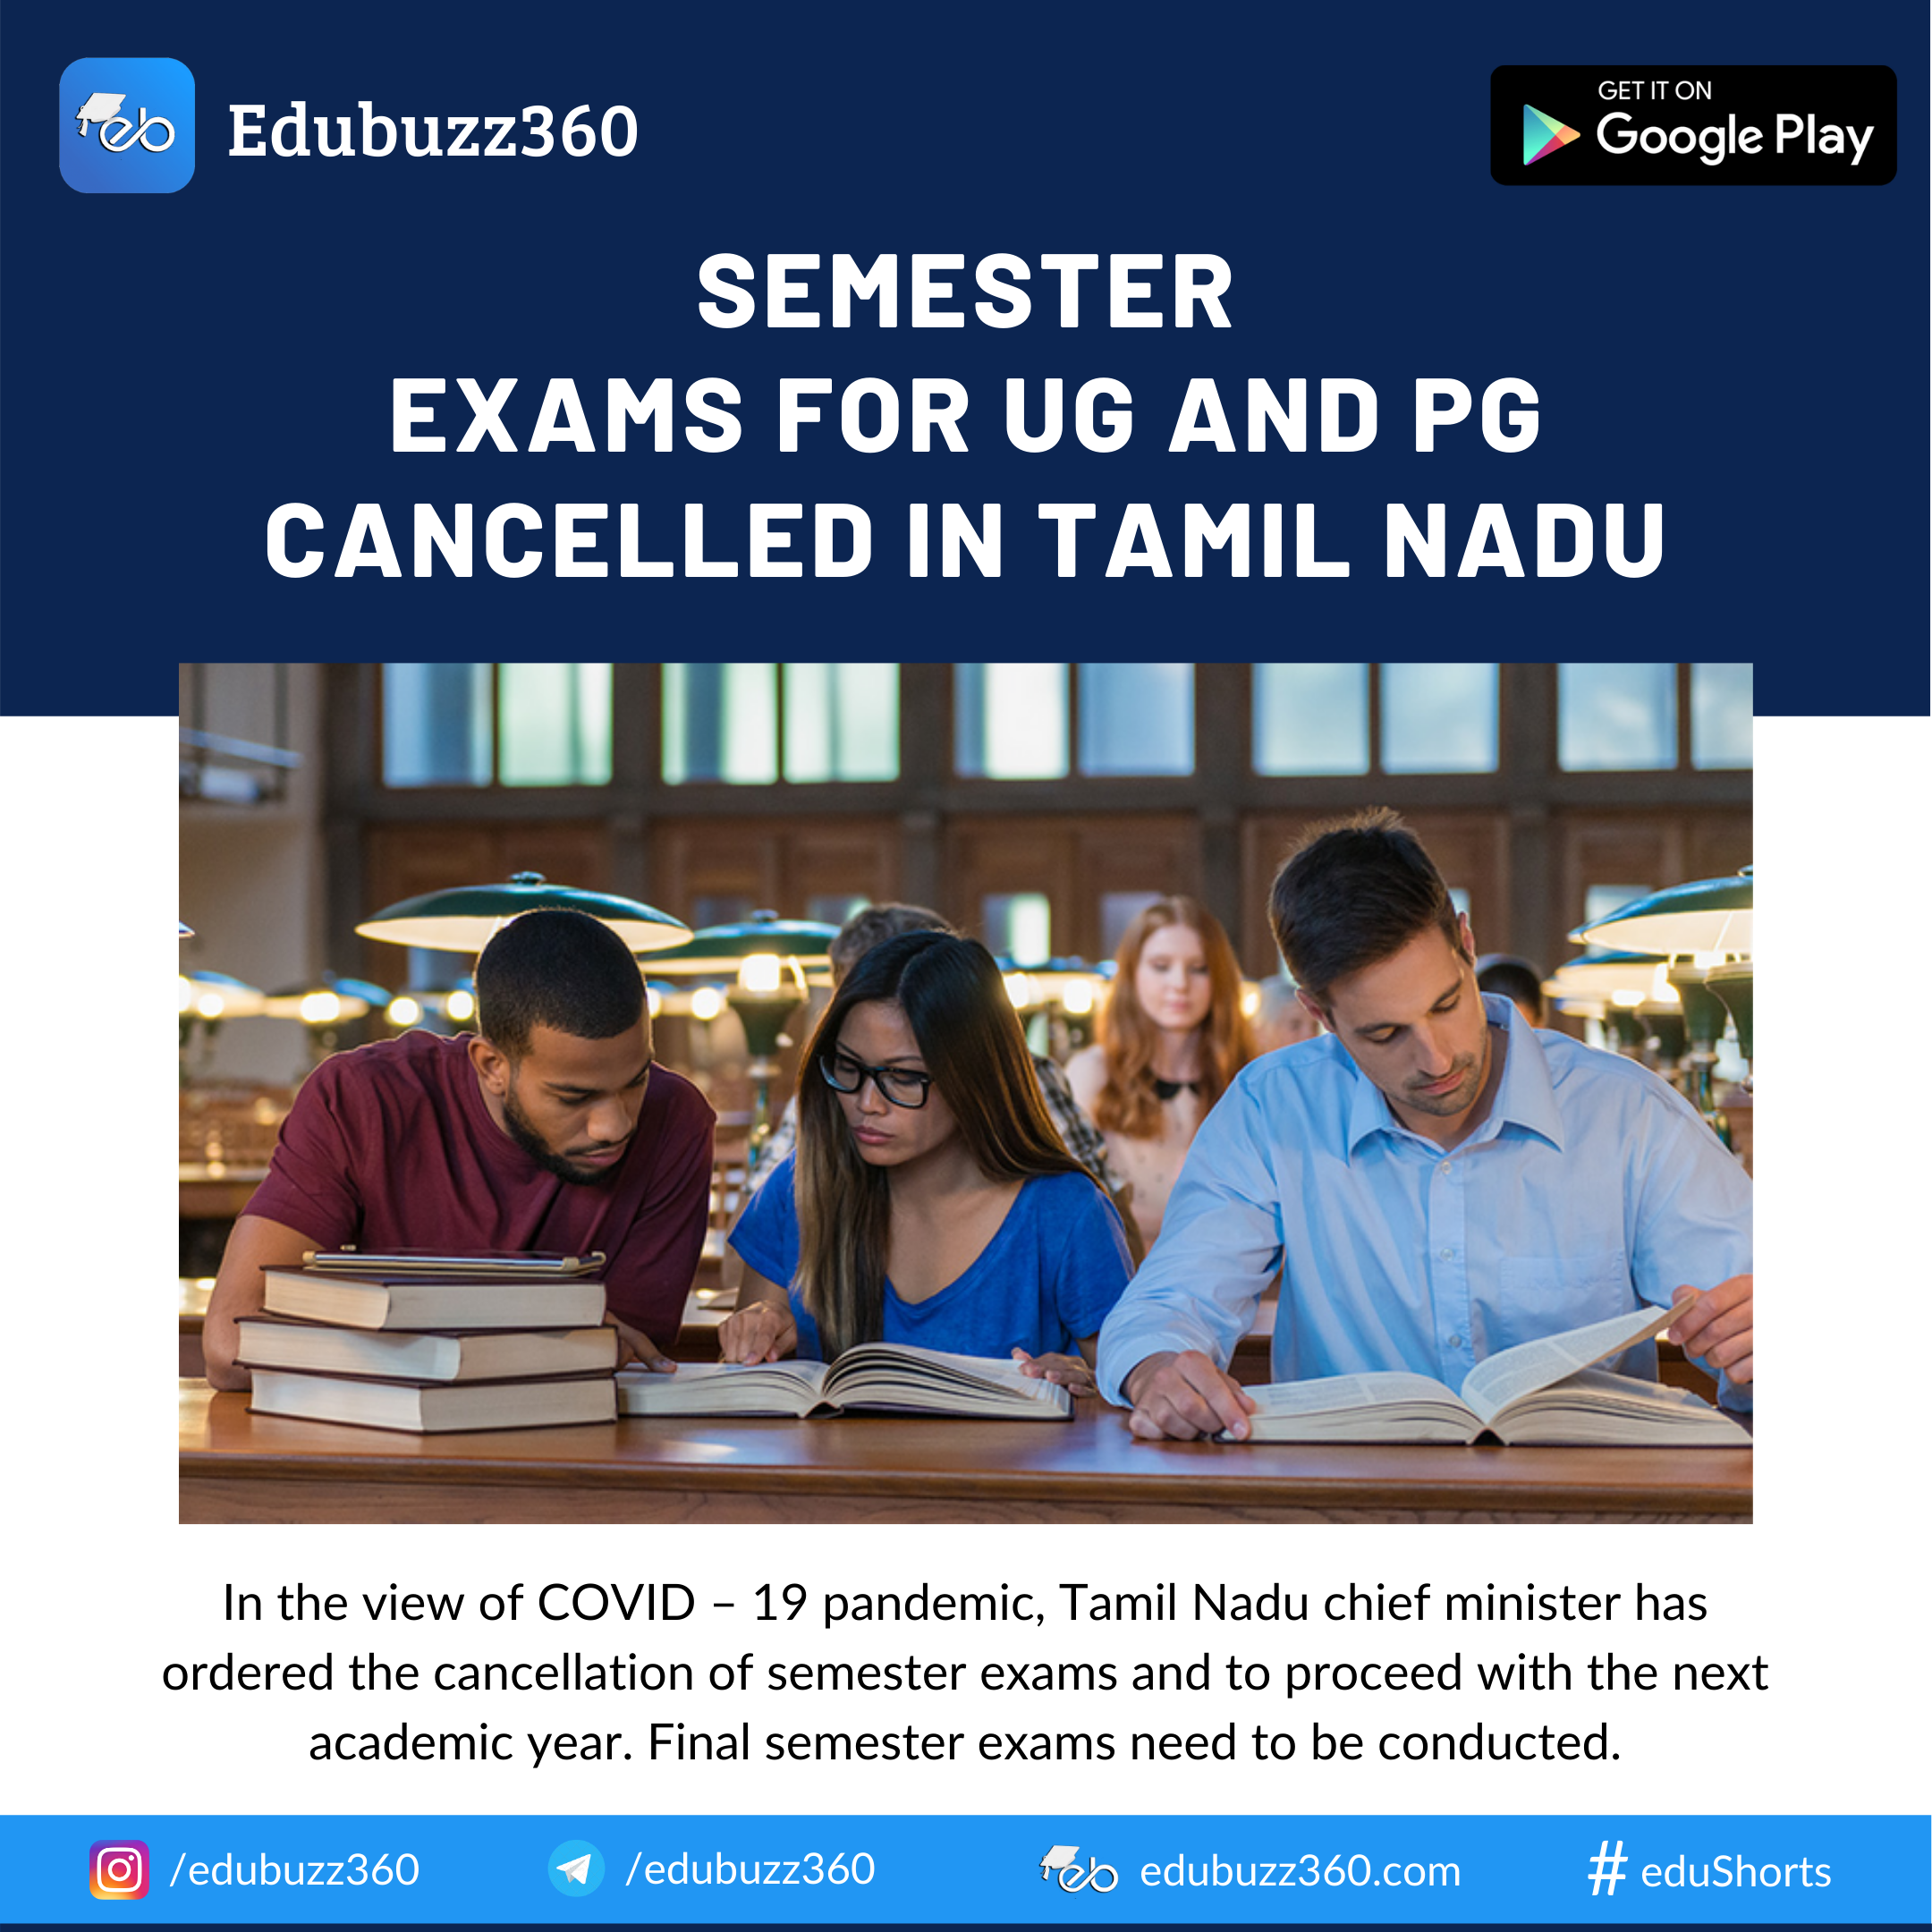 Semester exams for UG and PG cancelled in Tamil Nadu: